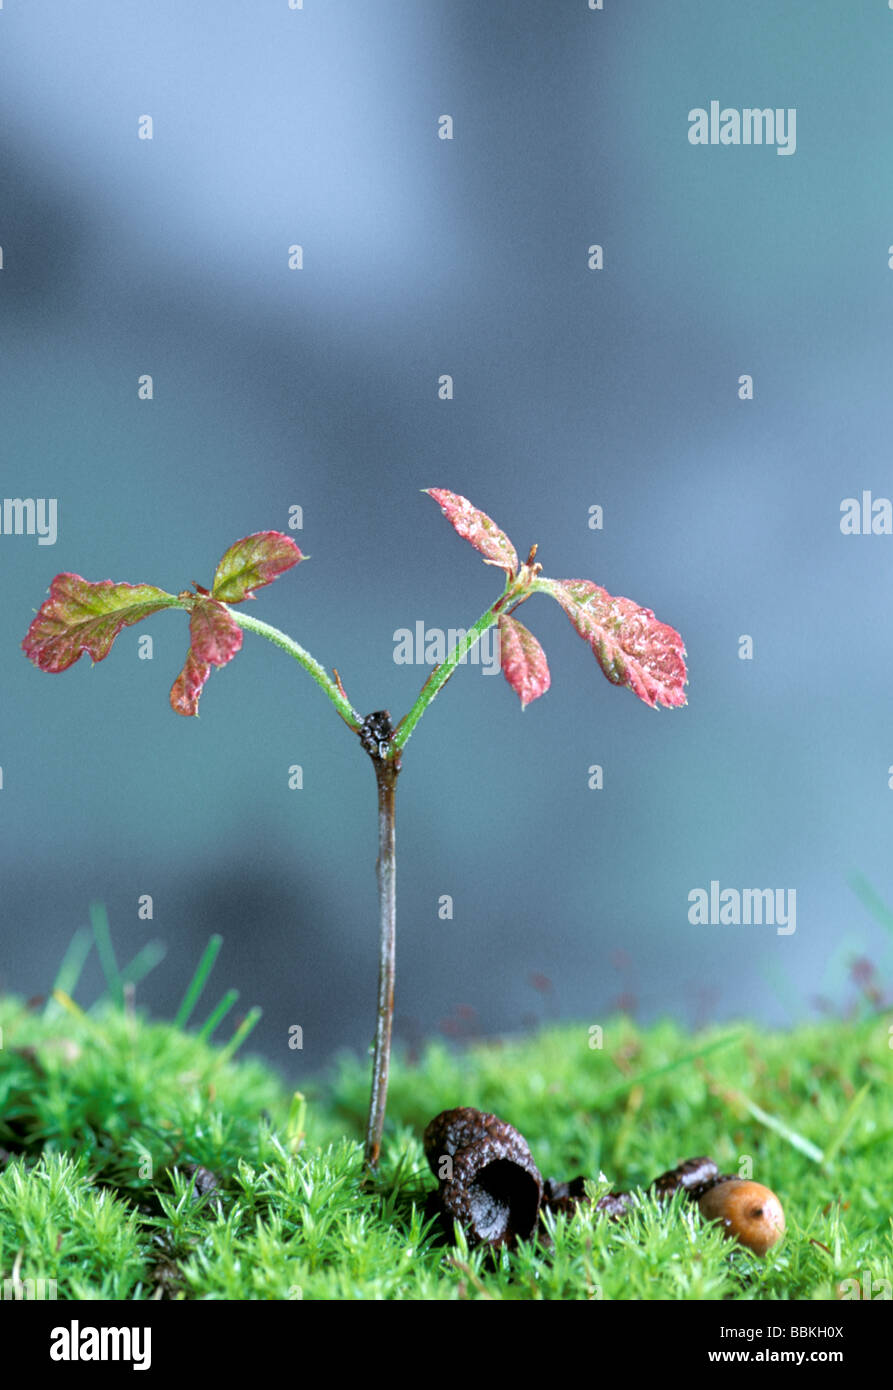 Two from one: Seedling shingle oak sprouts from acorn in moss, Missouri USA Stock Photo